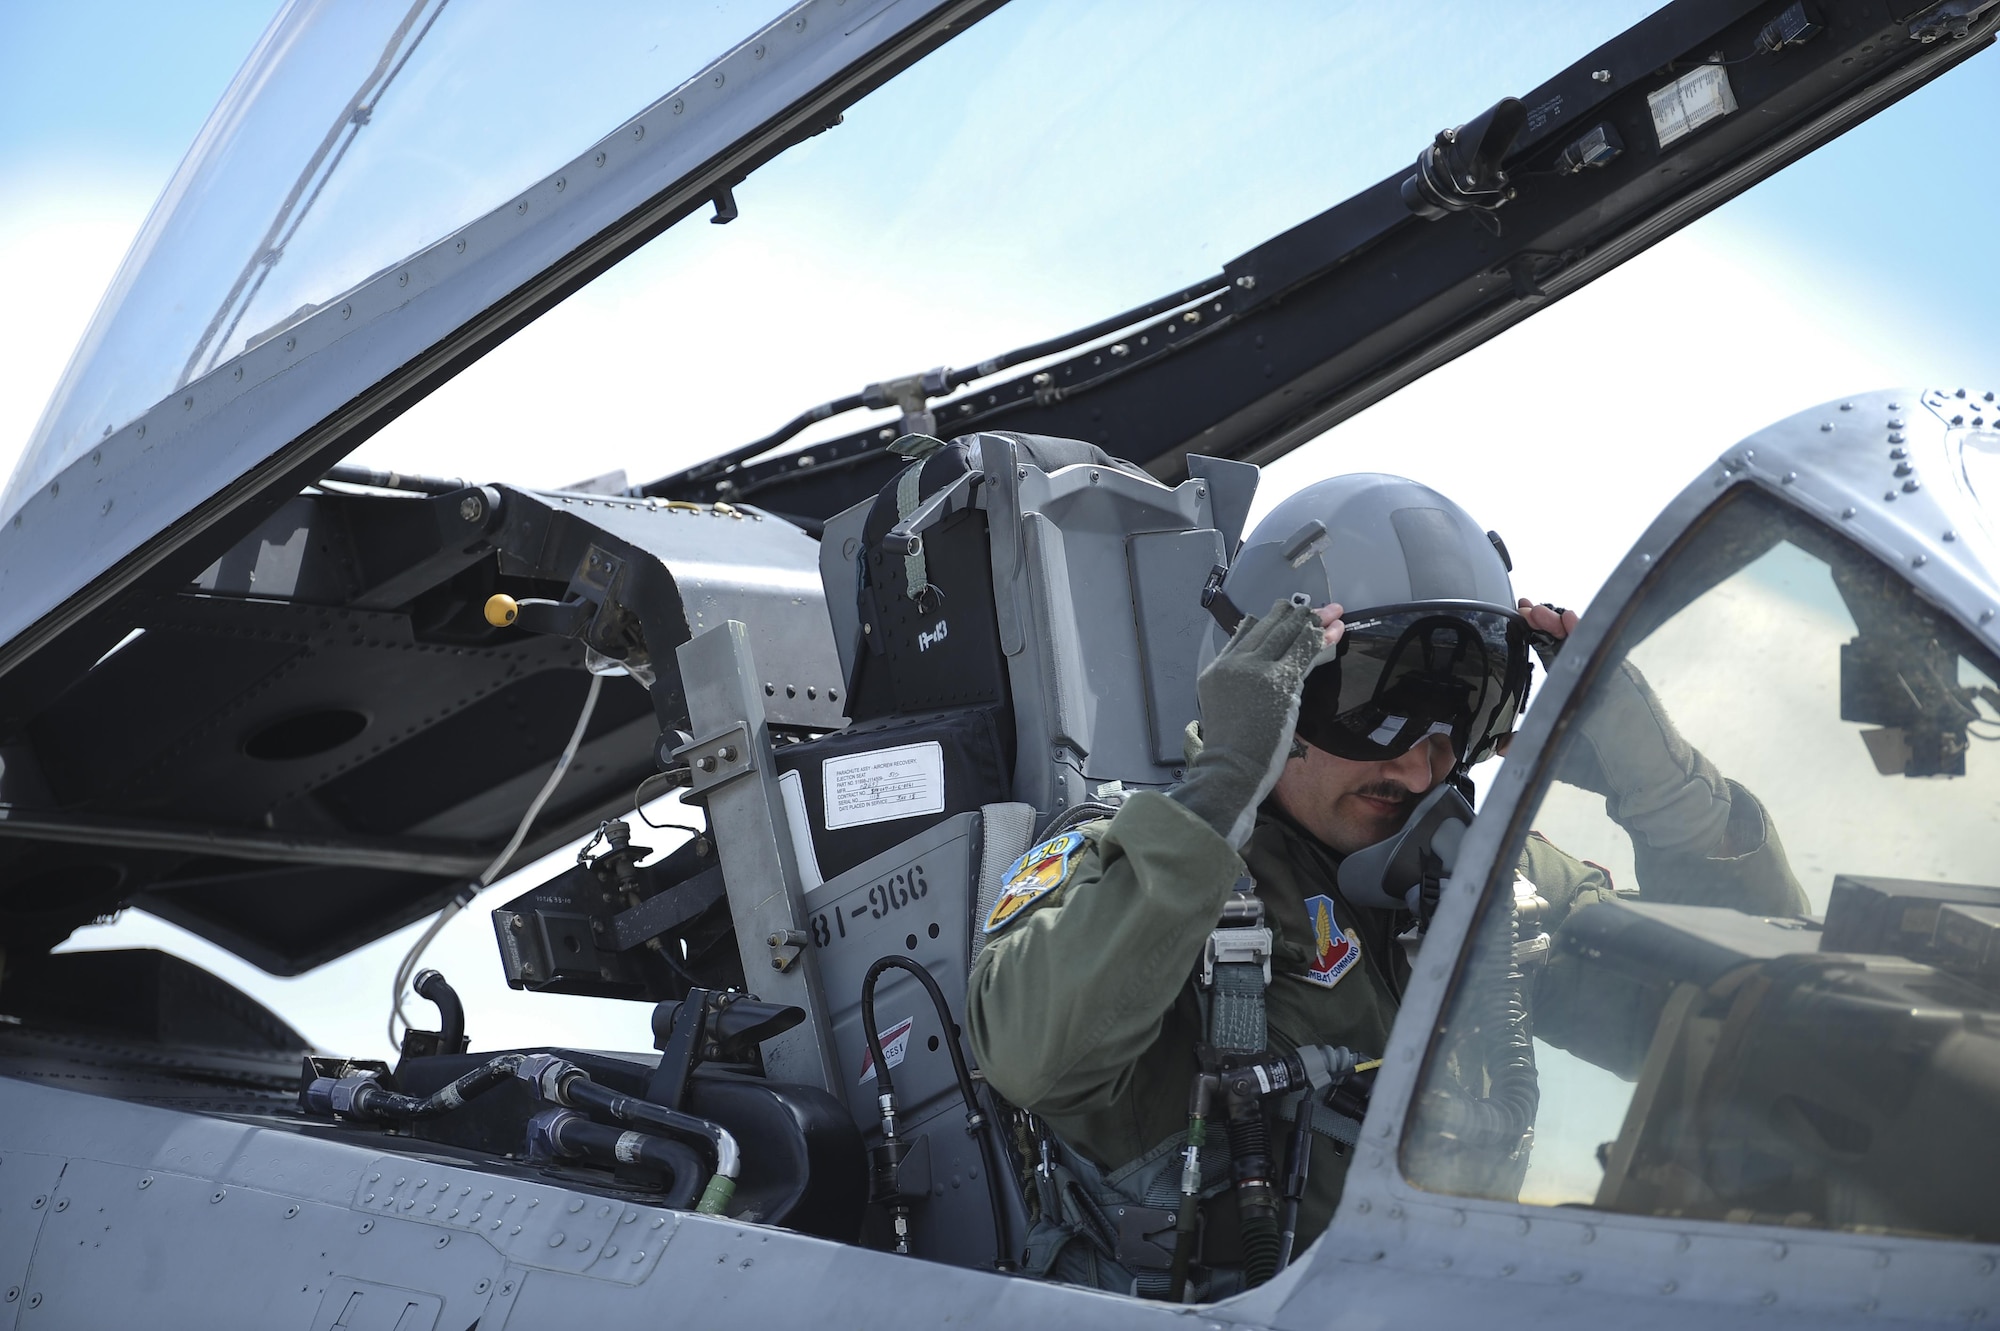 U.S. Air Force Capt. Chad Rudolph, 357th Fighter Squadron and A-10 West Heritage Flight Team pilot, puts on his goggles before takeoff during the Los Angeles County Air Show in Lancaster, Calif., March 25, 2017. This is the team’s first air show performance after nearly five years of disbandment. (U.S. Air Force photo by Airman 1st Class Mya M. Crosby)